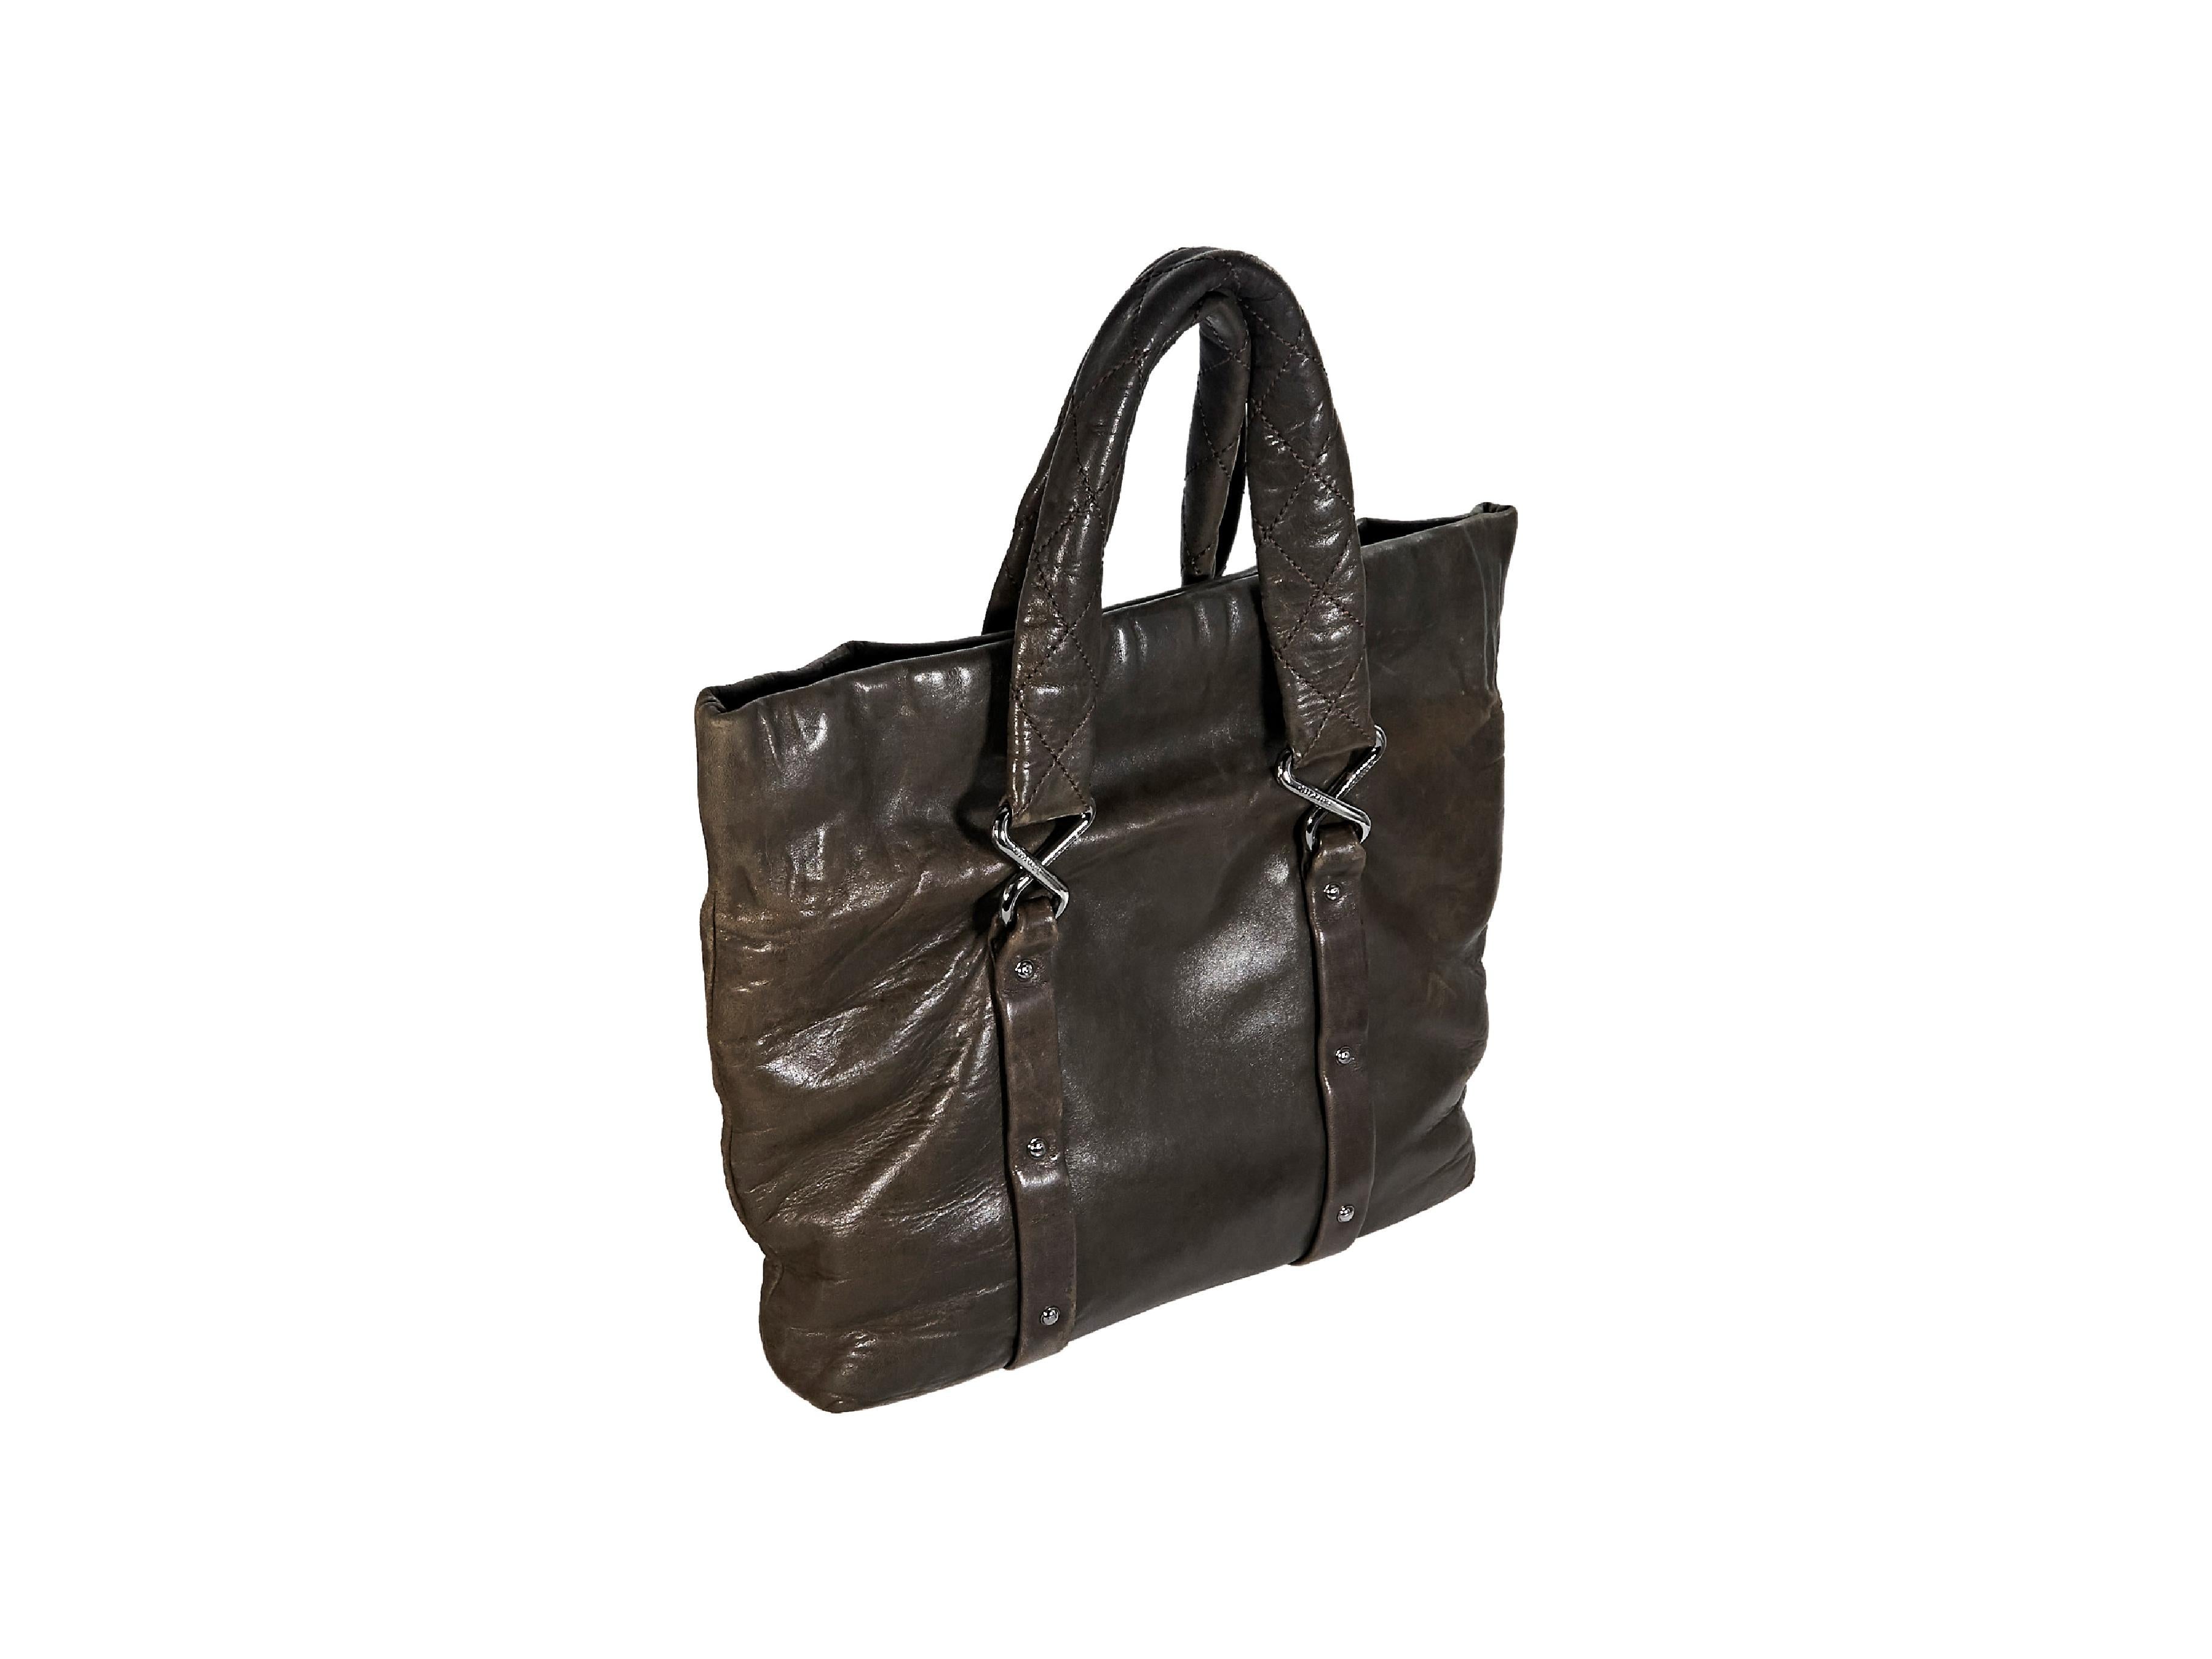 Product details:  Brown leather tote bag by Chanel.  Magnetic snap closure.  Top carry handles.  Lined interior with inner zip and slide pockets.  Front quilted twist-lock pocket.  Gunmetal-tone hardware.  16